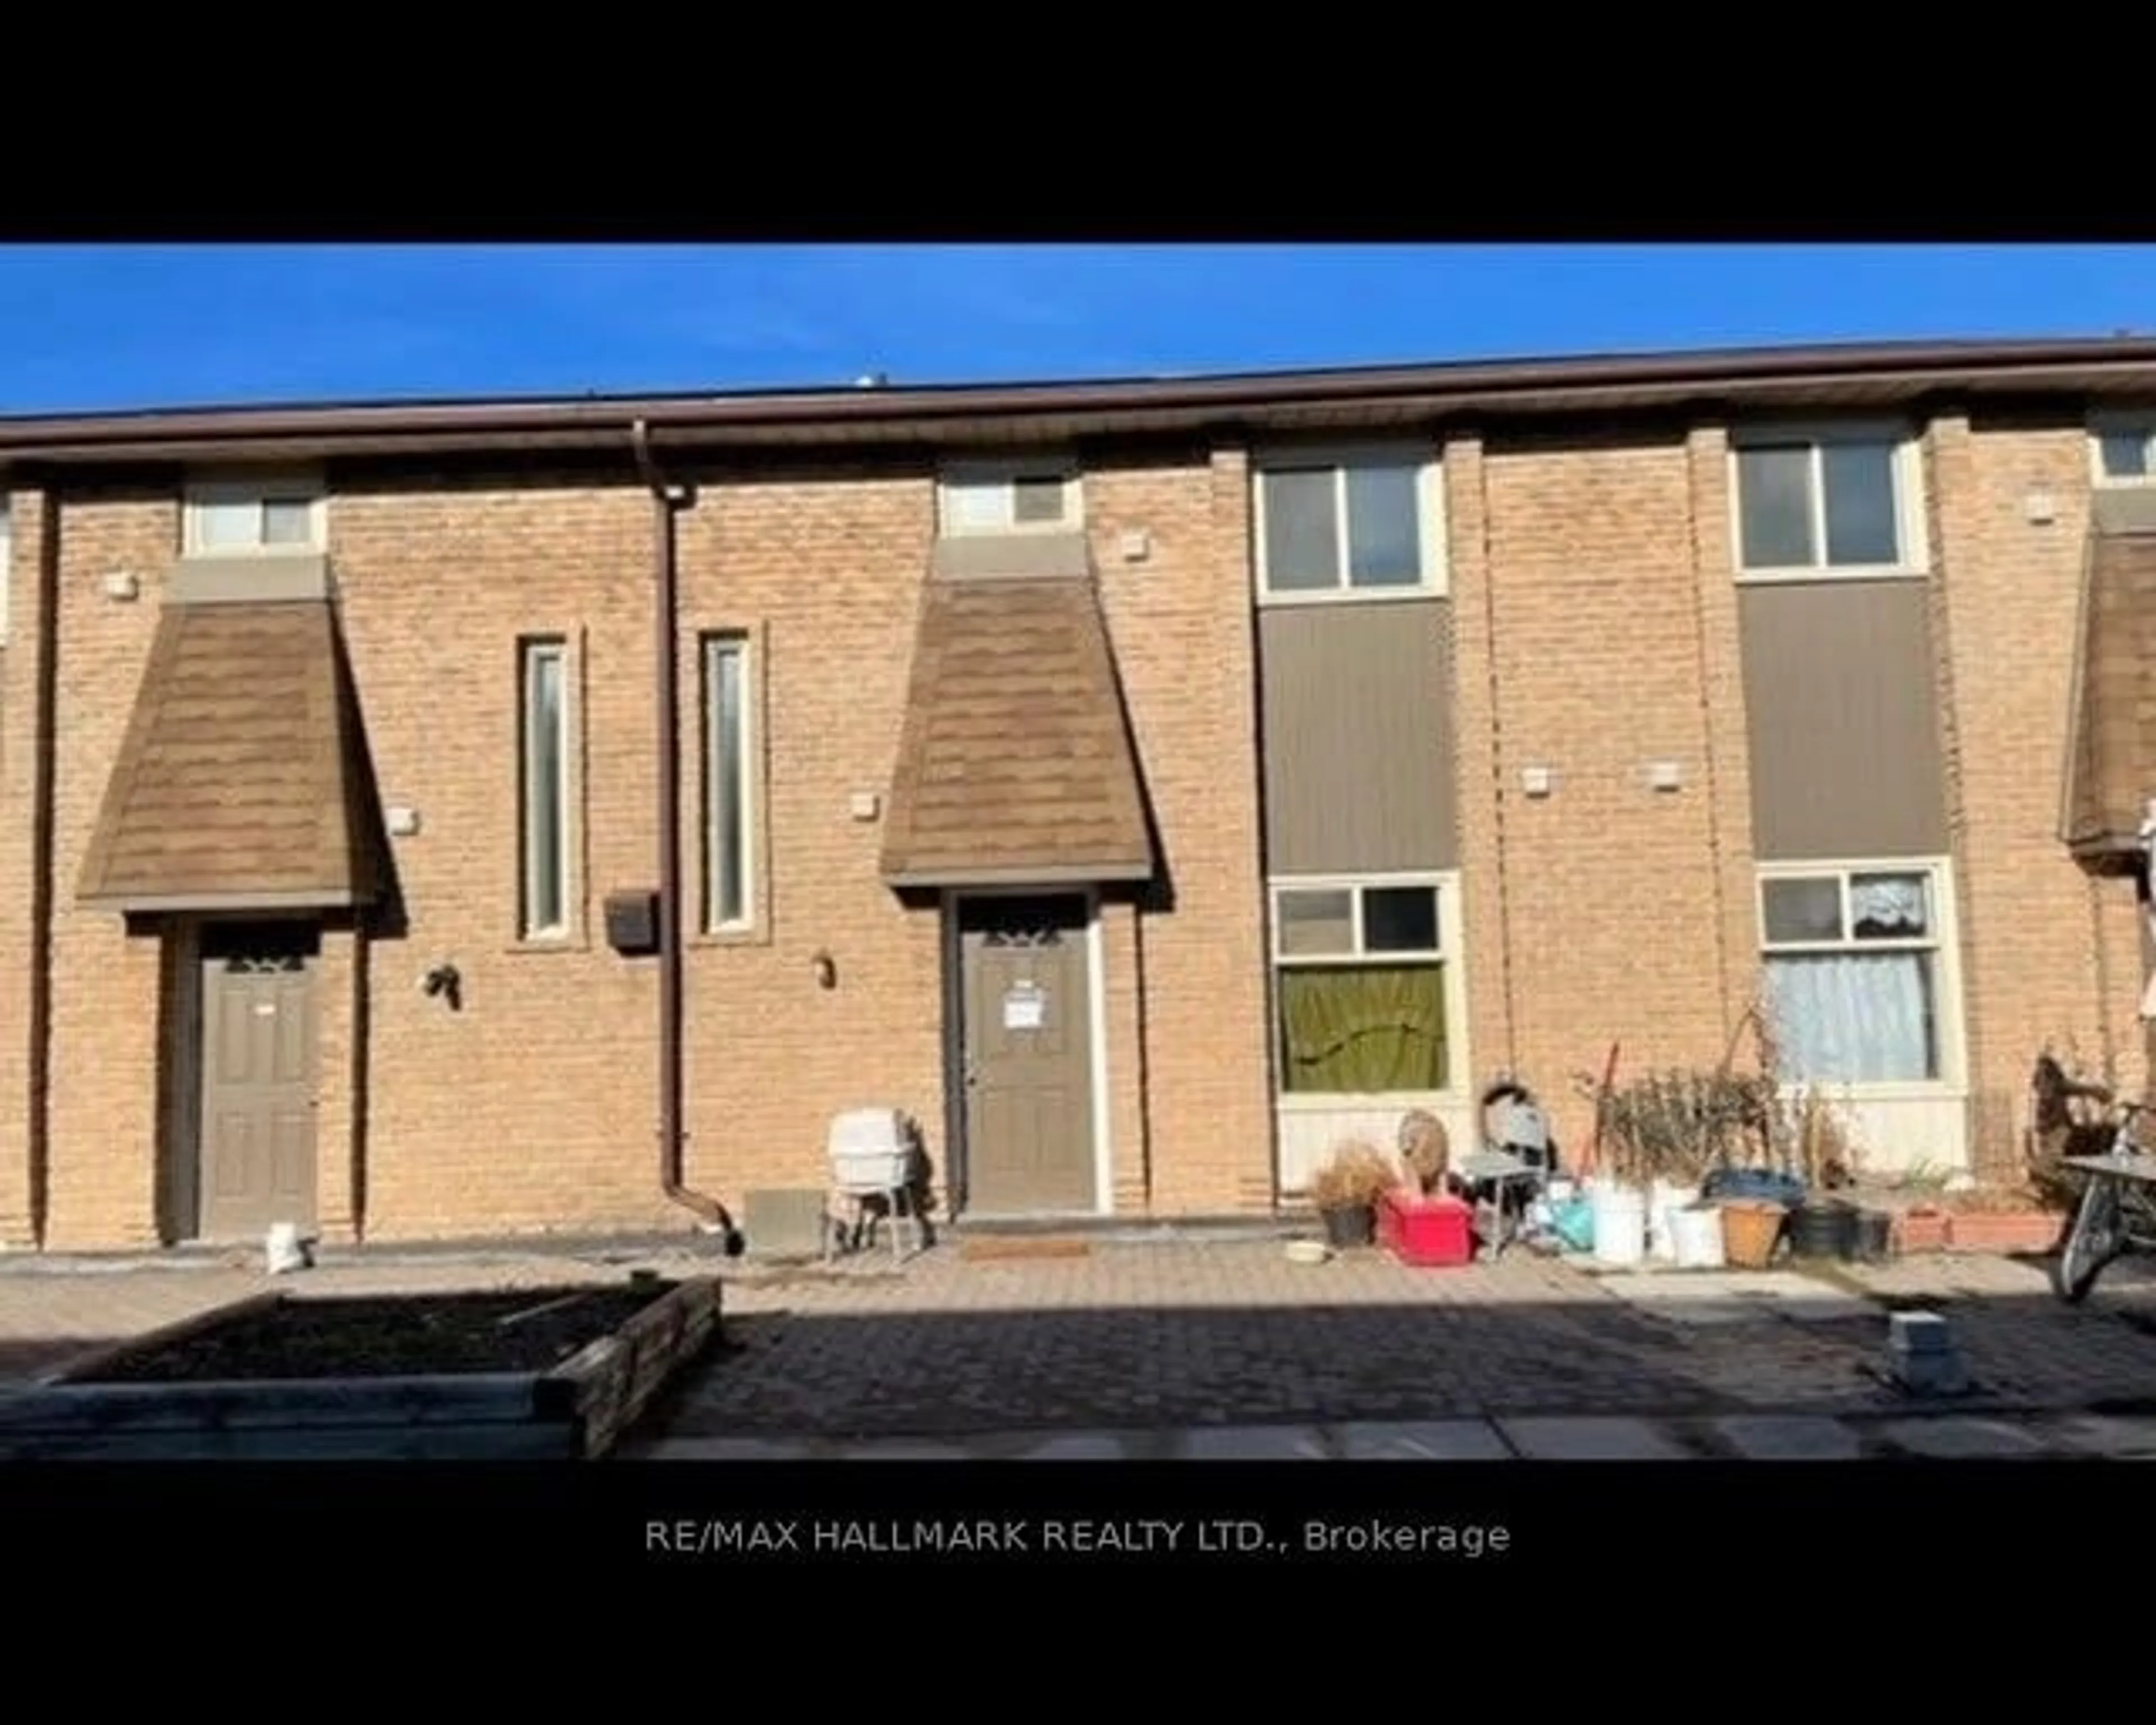 A pic from exterior of the house or condo for 28 Rexdale Blvd #16, Toronto Ontario M9W 5Z2